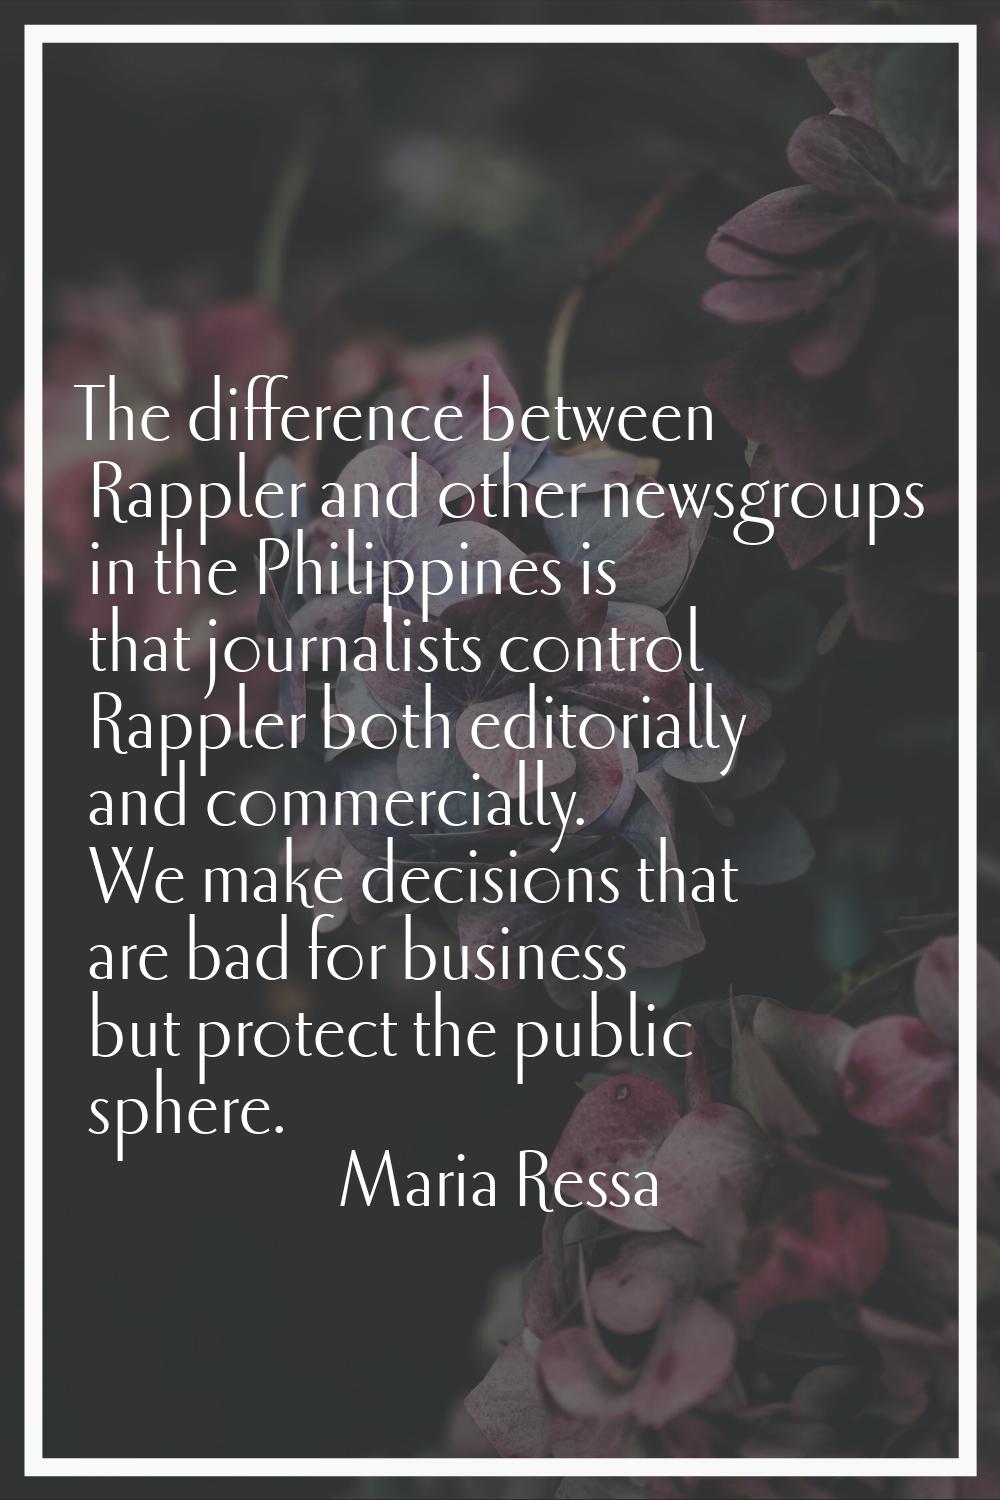 The difference between Rappler and other newsgroups in the Philippines is that journalists control 